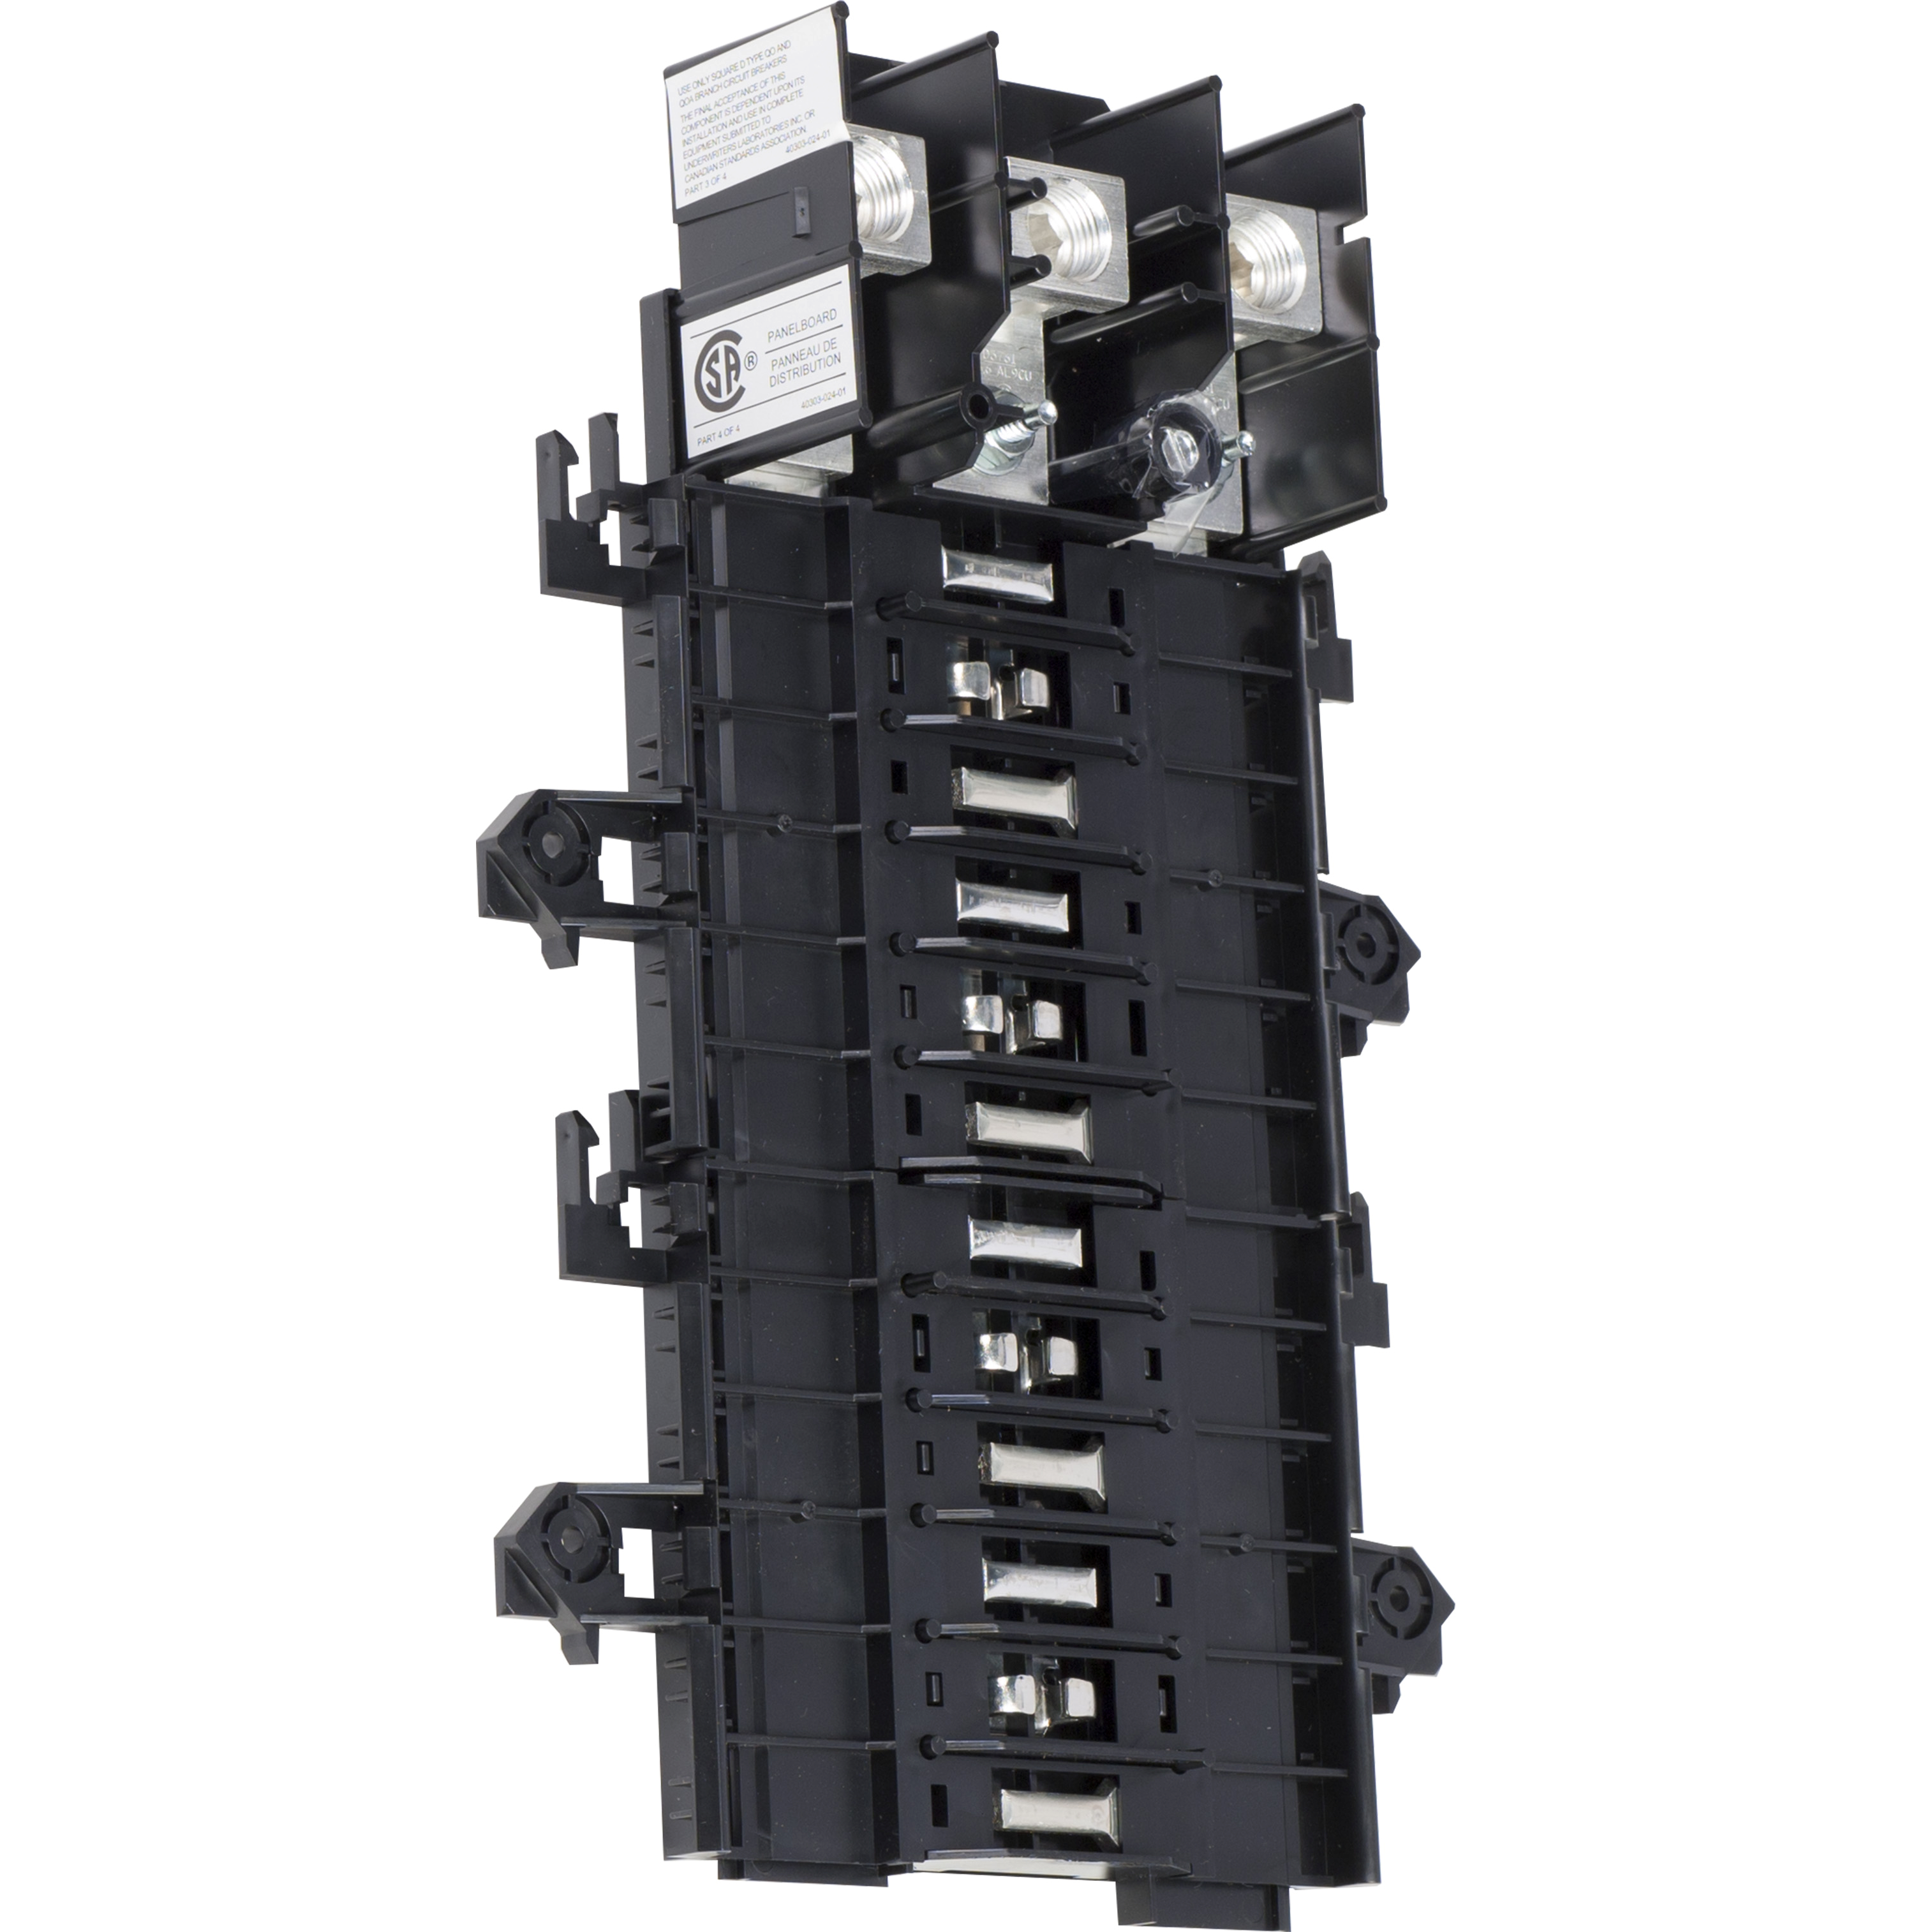 Load center interior, QO, mounting base, 3 phase, 20 spaces, 125A main lugs, OEM, neutral busbar